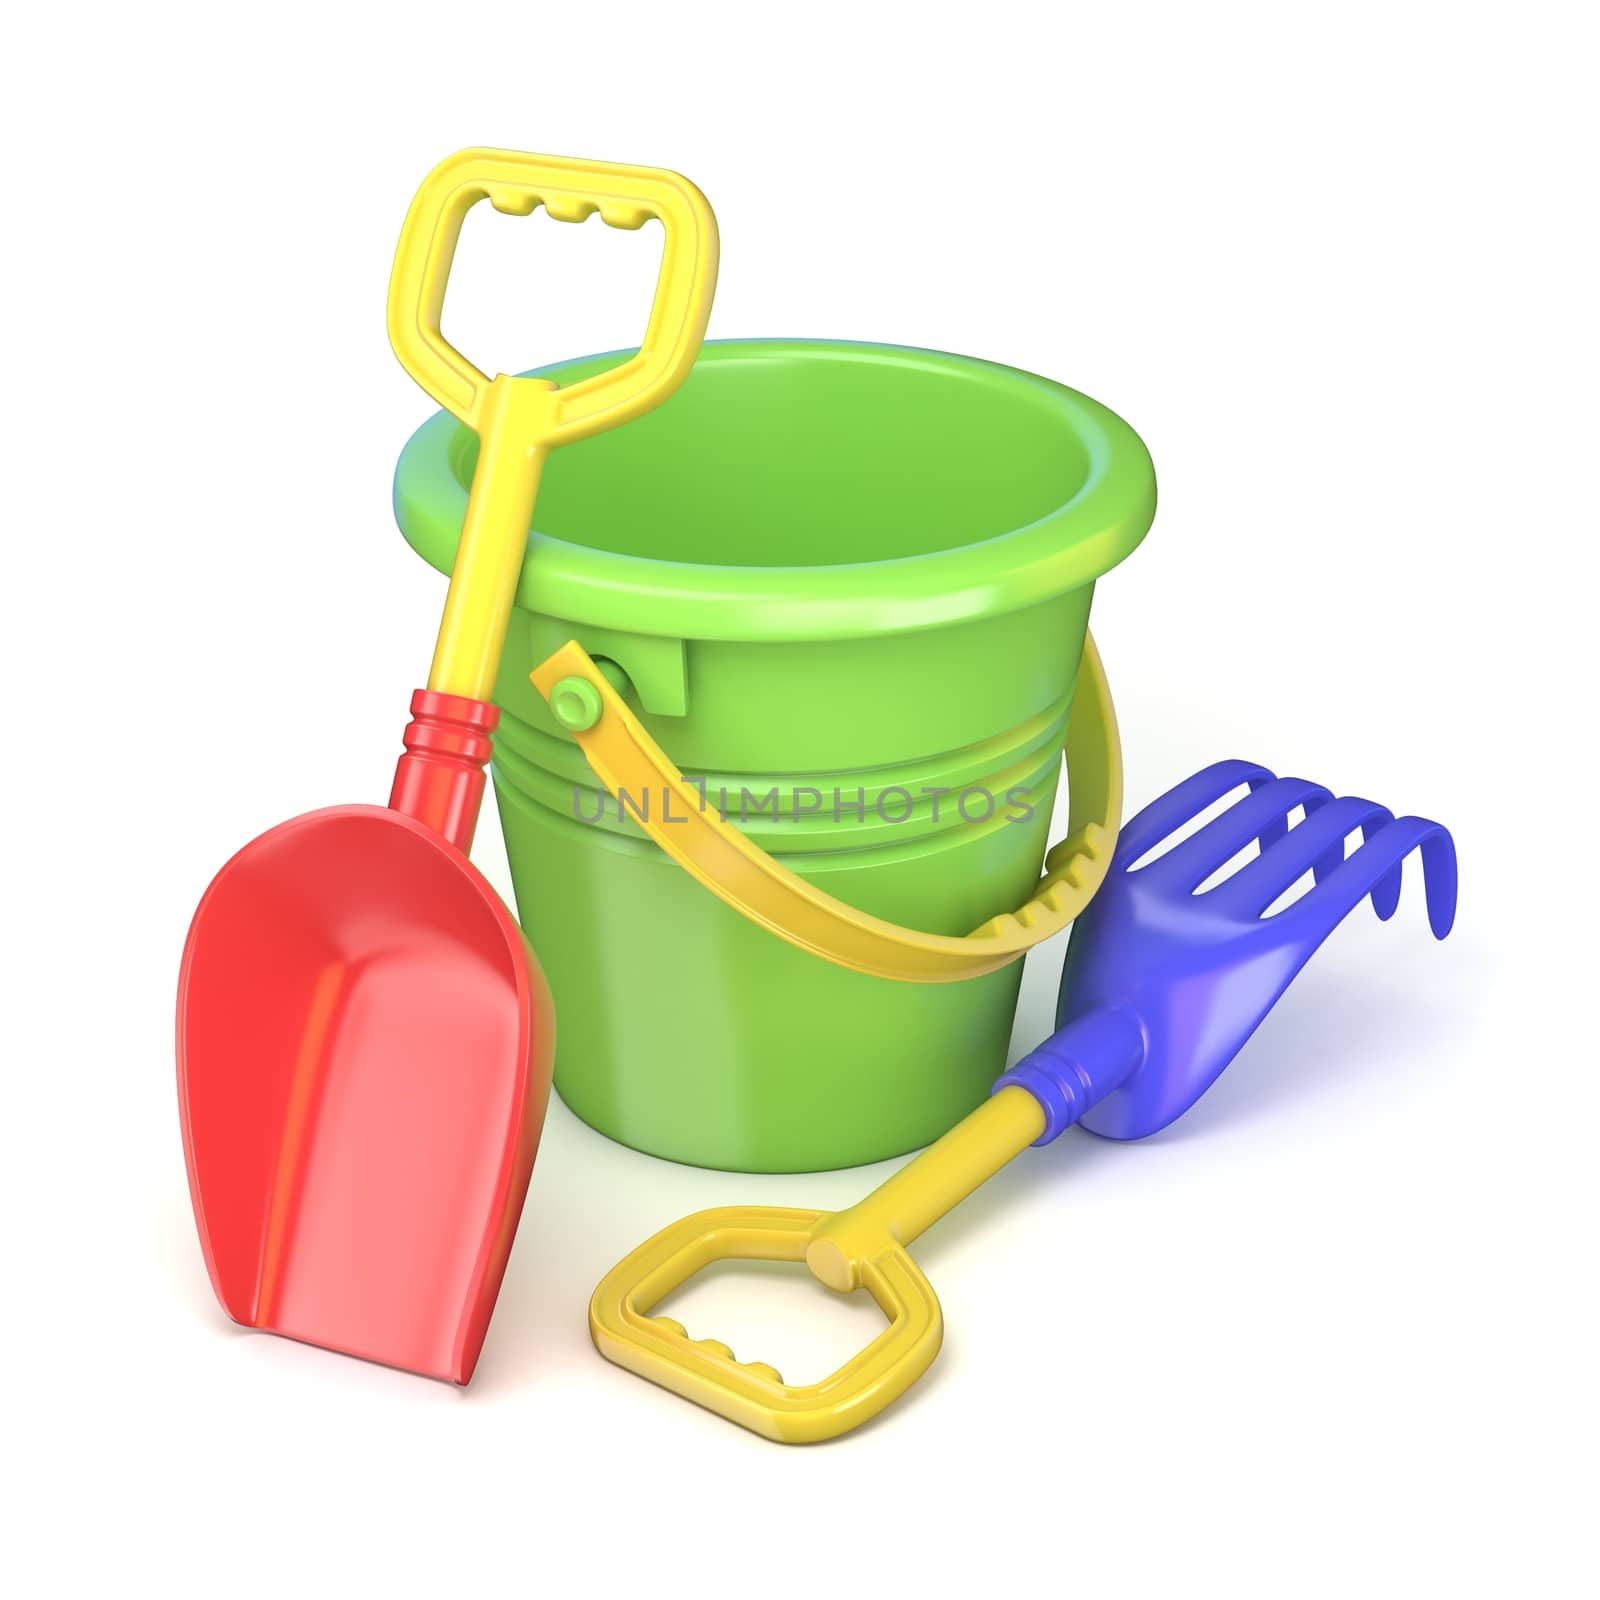 Toy bucket, rake and spade. 3D by djmilic